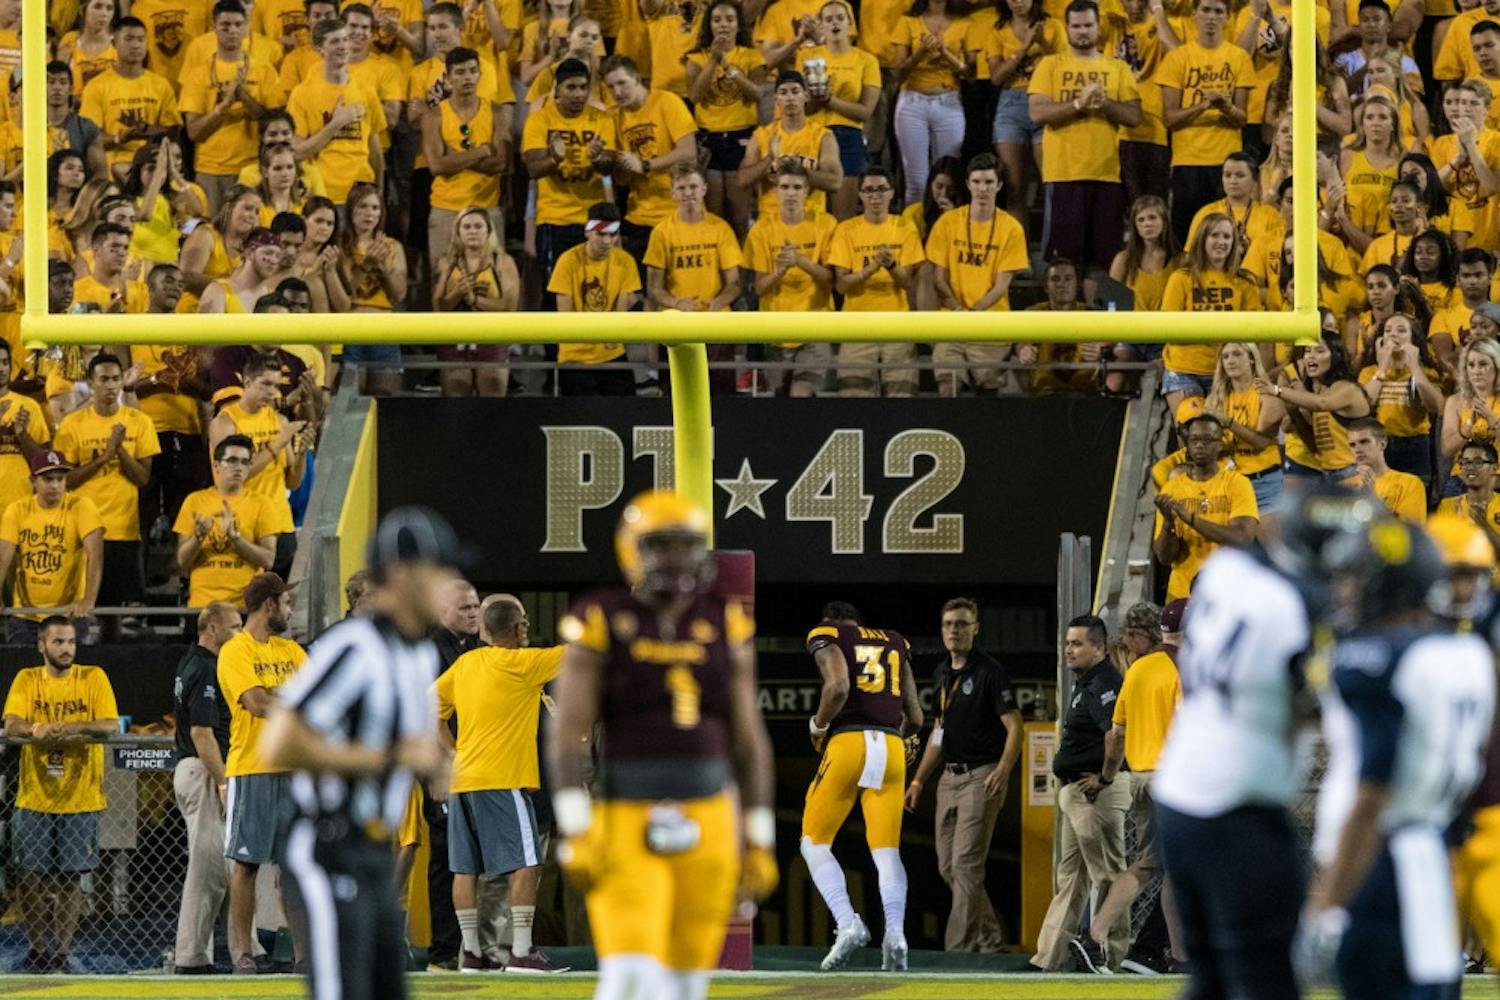 ASU redshirt junior linebacker Marcus Ball walks back to the locker room after being ejected for a targeting penalty during the third quarter of the game against Northern Arizona University in Sun Devil Stadium in Tempe, Arizona, on Sept. 3, 2016.